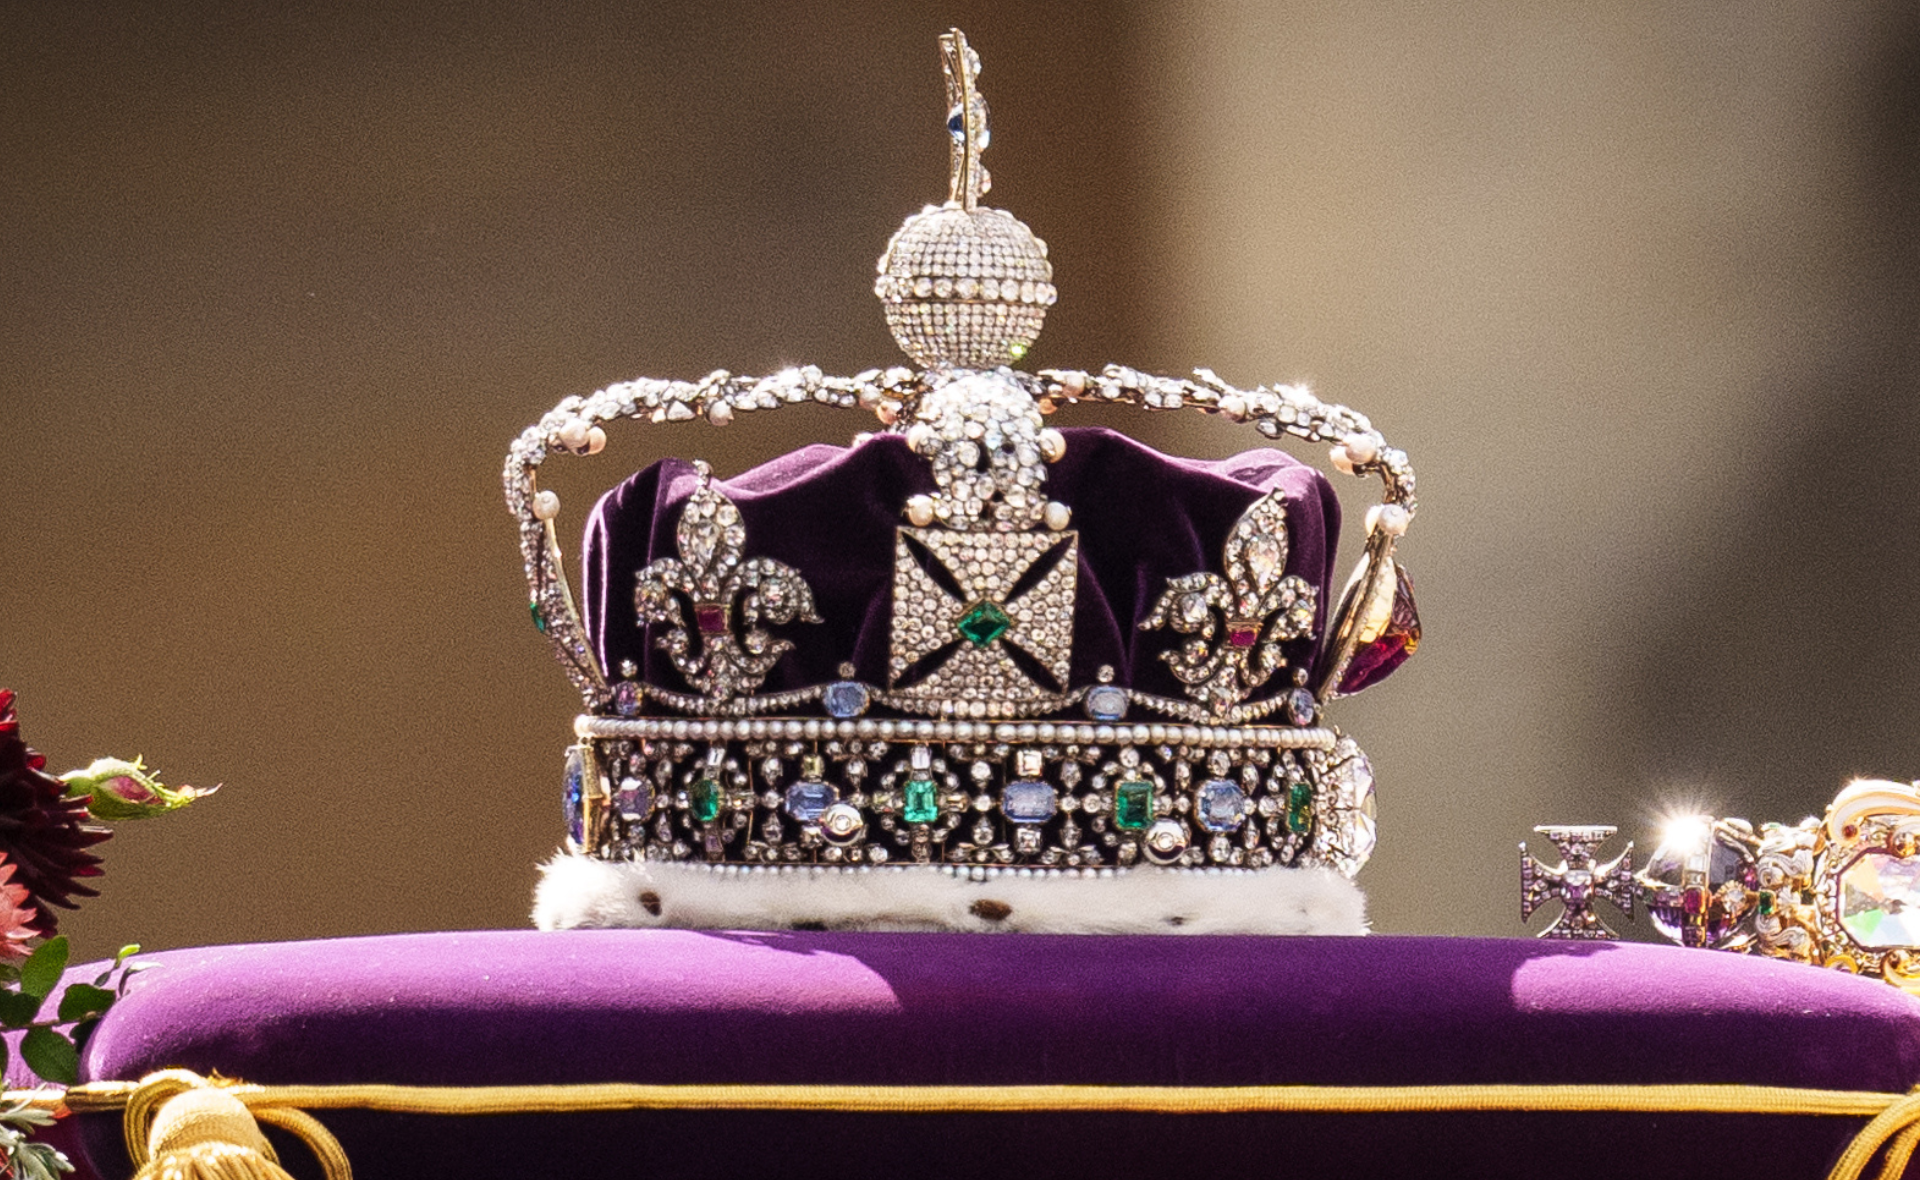 What are the 12 monarchies of Europe?